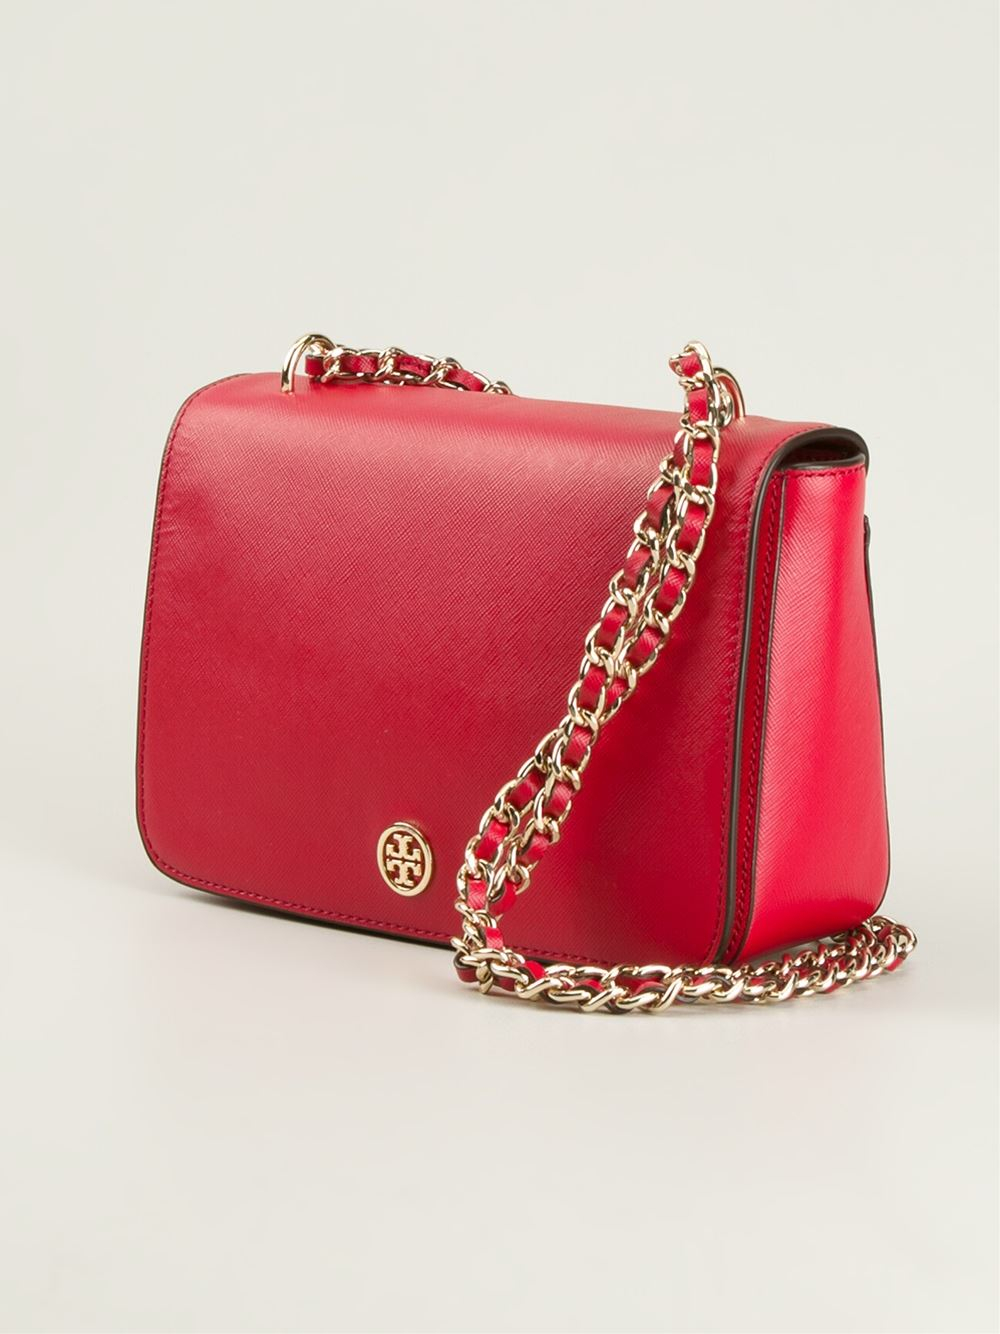 Lyst - Tory Burch Robinson Shoulder Bag in Red